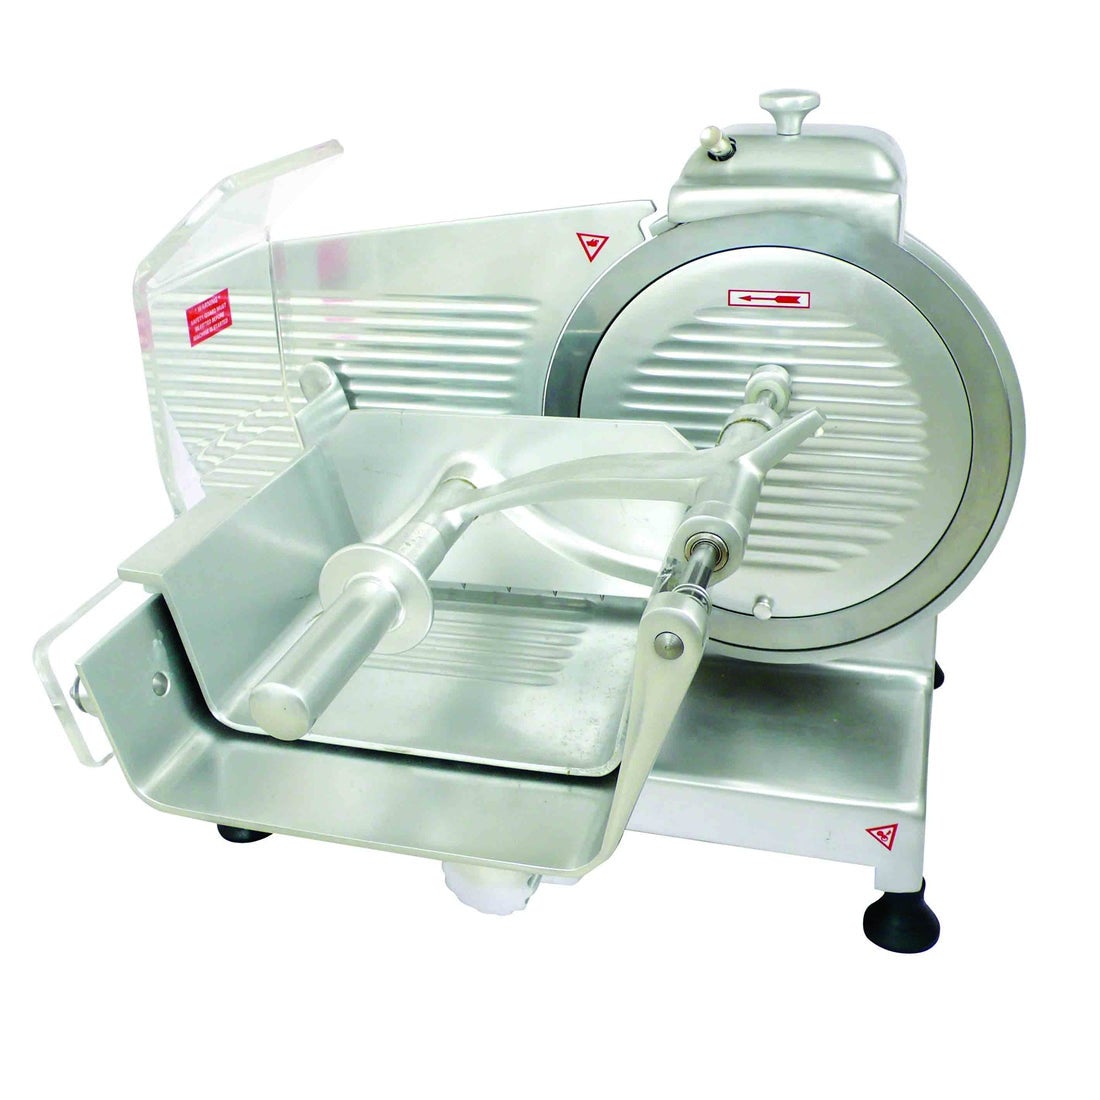 VC Meat Slicer For Non-Frozen Meat - HBS-300C Meat Slicers